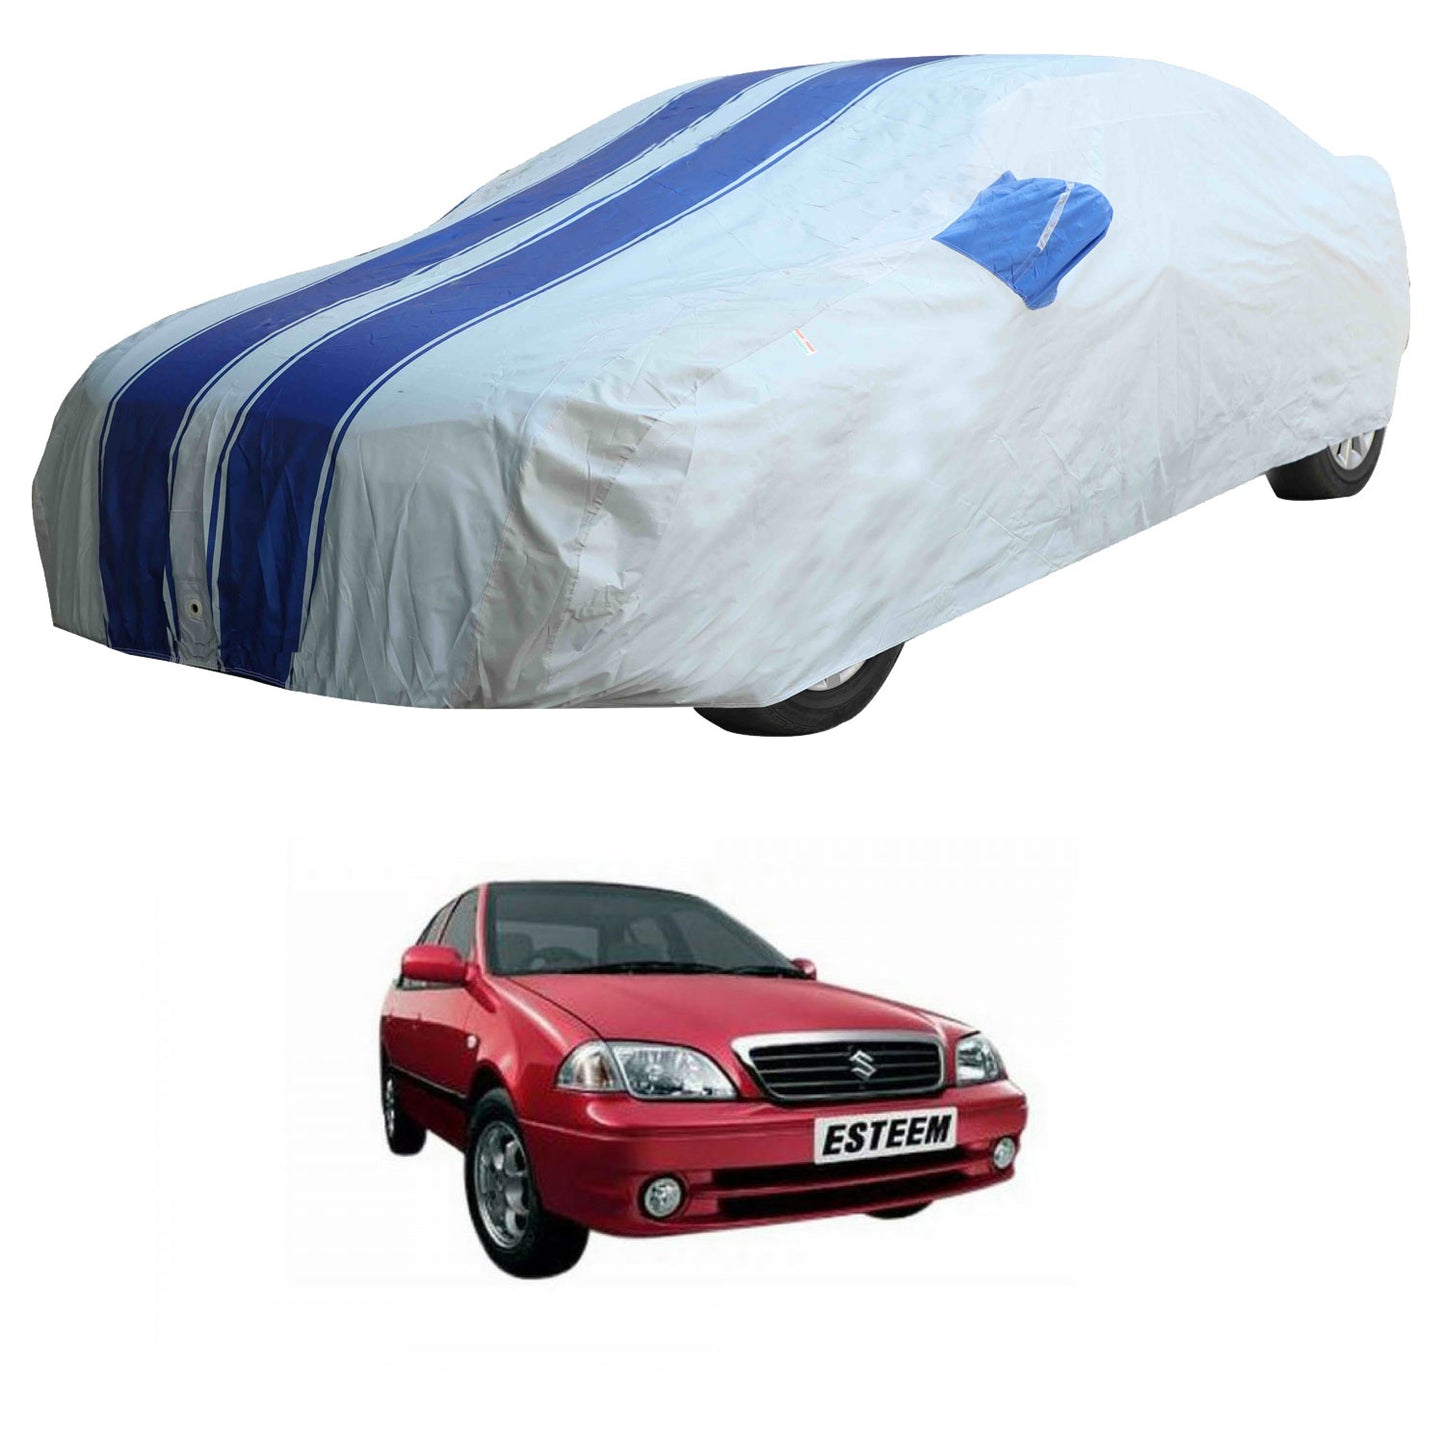 Oshotto 100% Blue dustproof and Water Resistant Car Body Cover with Mirror Pockets For Maruti Suzuki Esteem